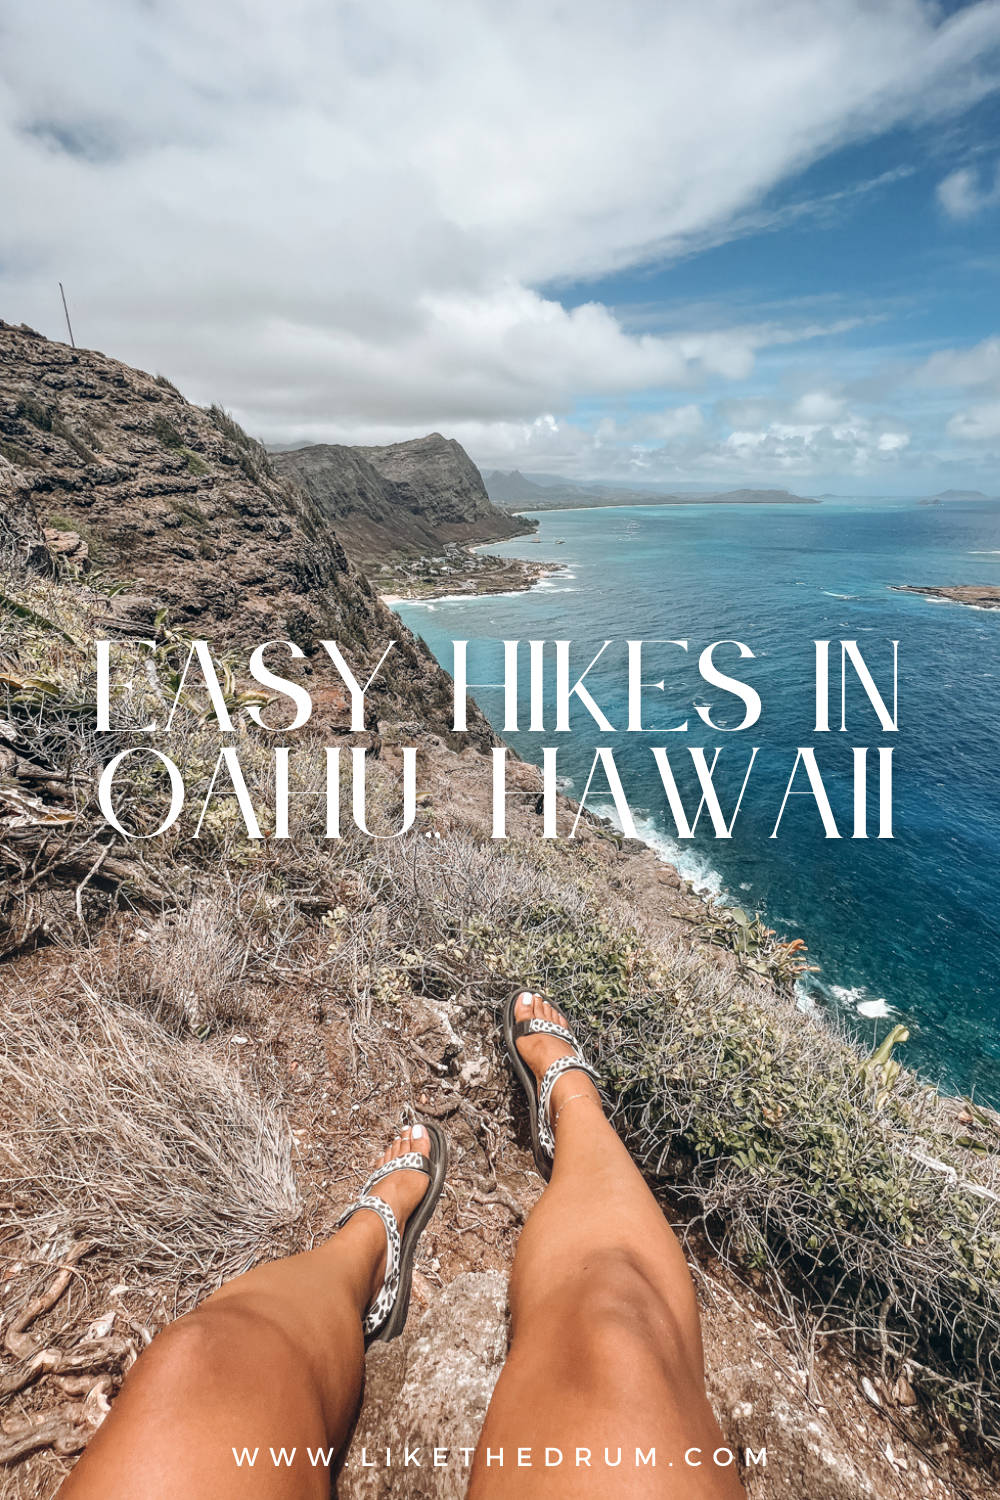 Easy Hikes in Oahu: The Best Oahu Hikes for Beginners